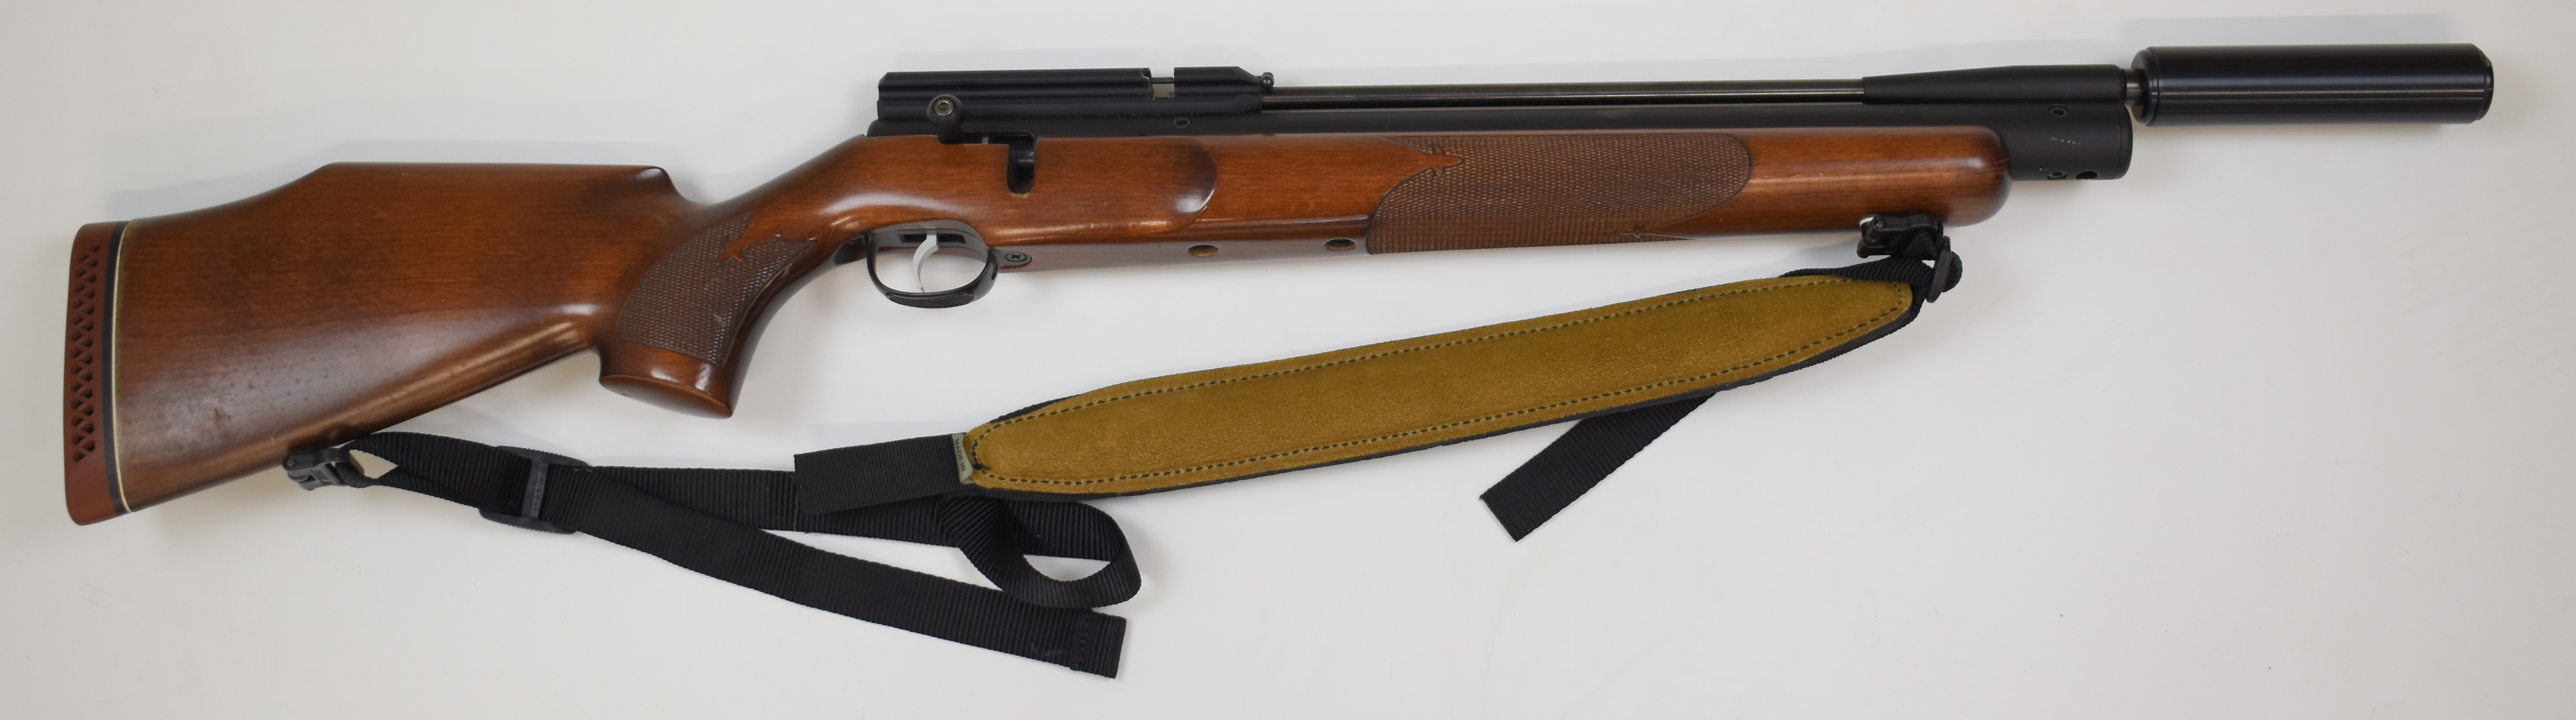 Webley Axsor .22 PCP air rifle with chequered semi-pistol grip and forend, raised cheek piece, - Image 2 of 10